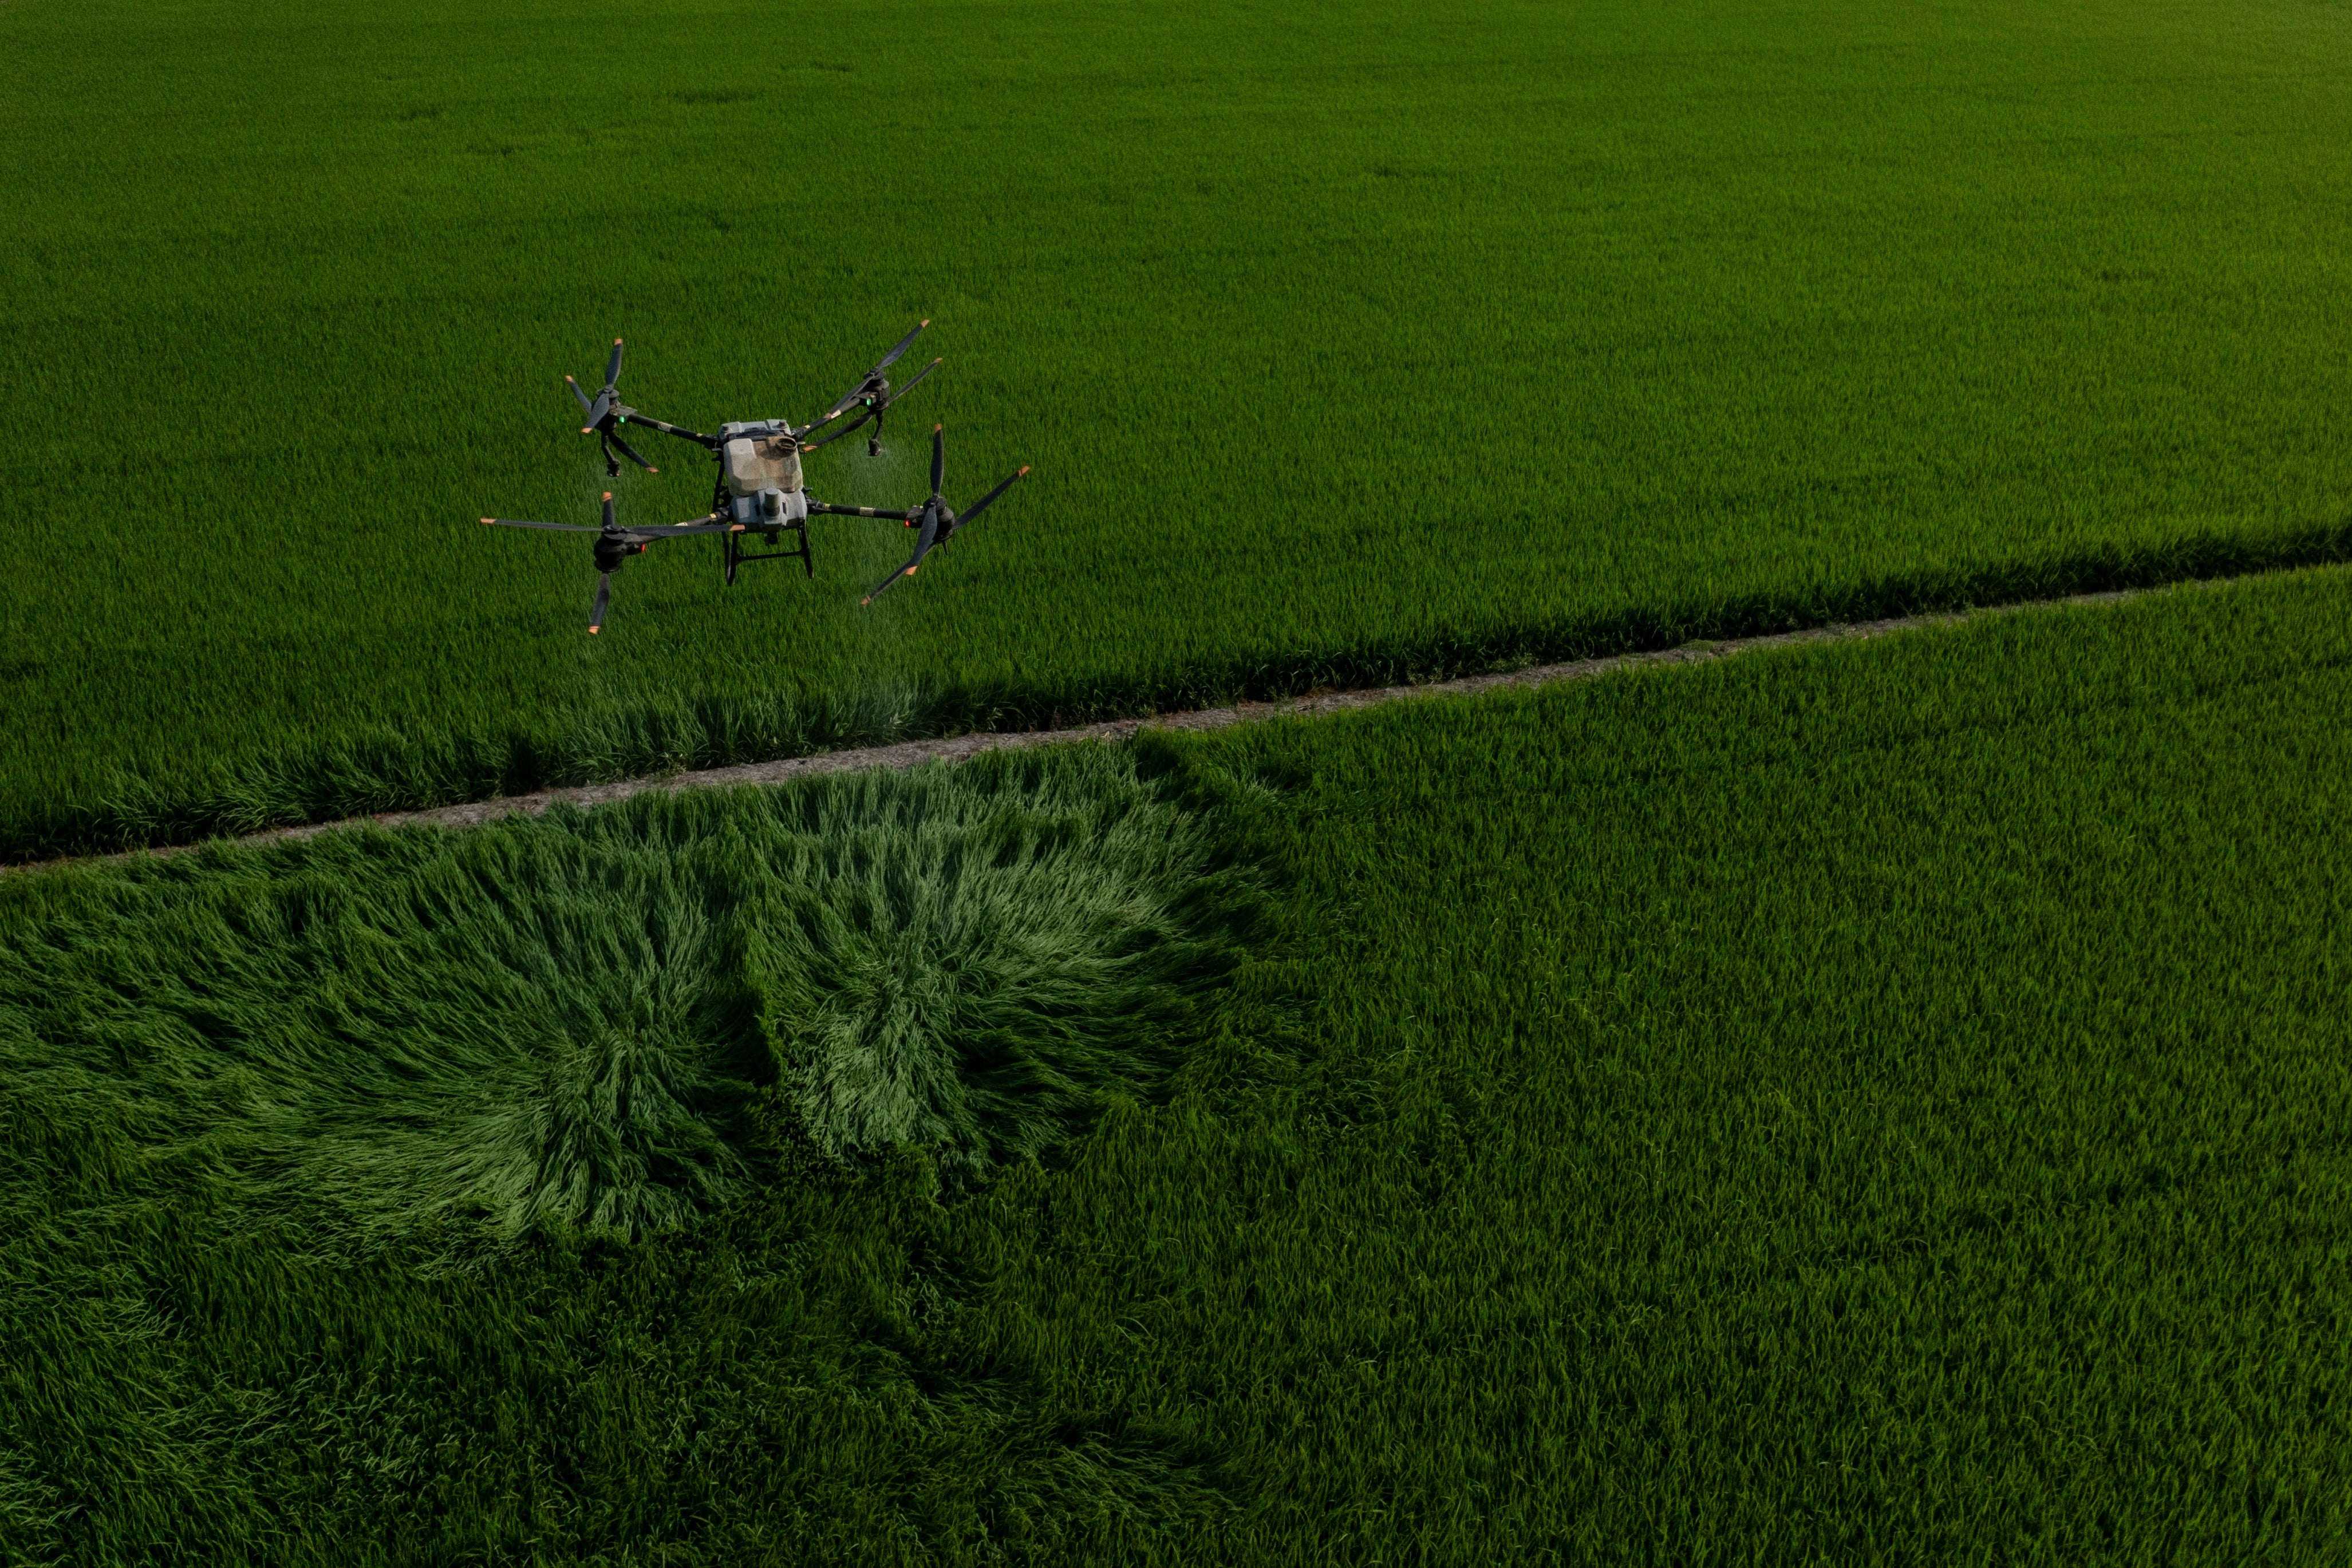 A large drone carrying fertilizer flies over Vo Van Van’s rice fields in Long An province in southern Vietnam